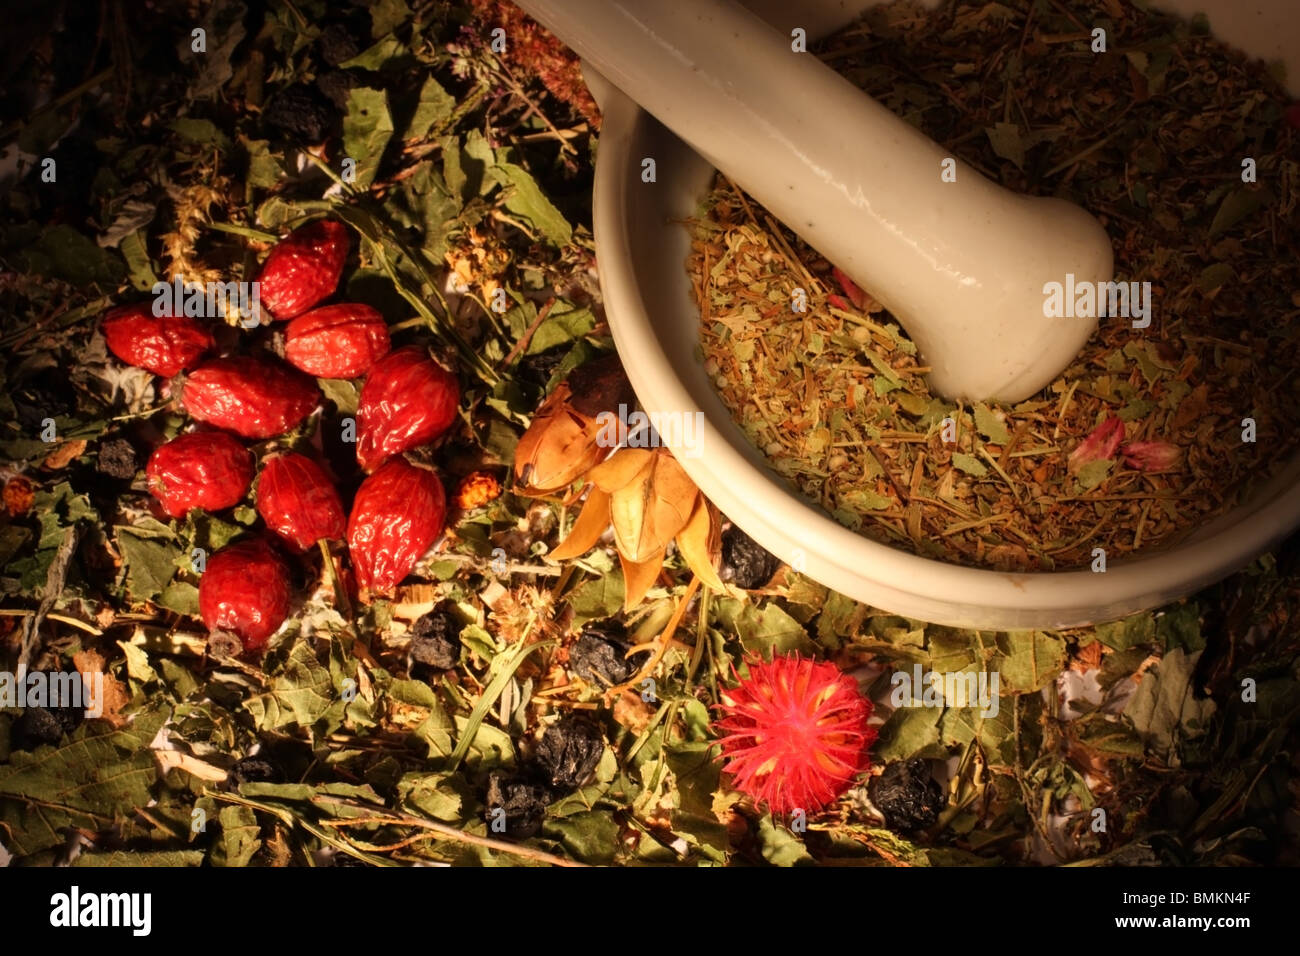 Mortar and pestle with dry herbs and hips Stock Photo